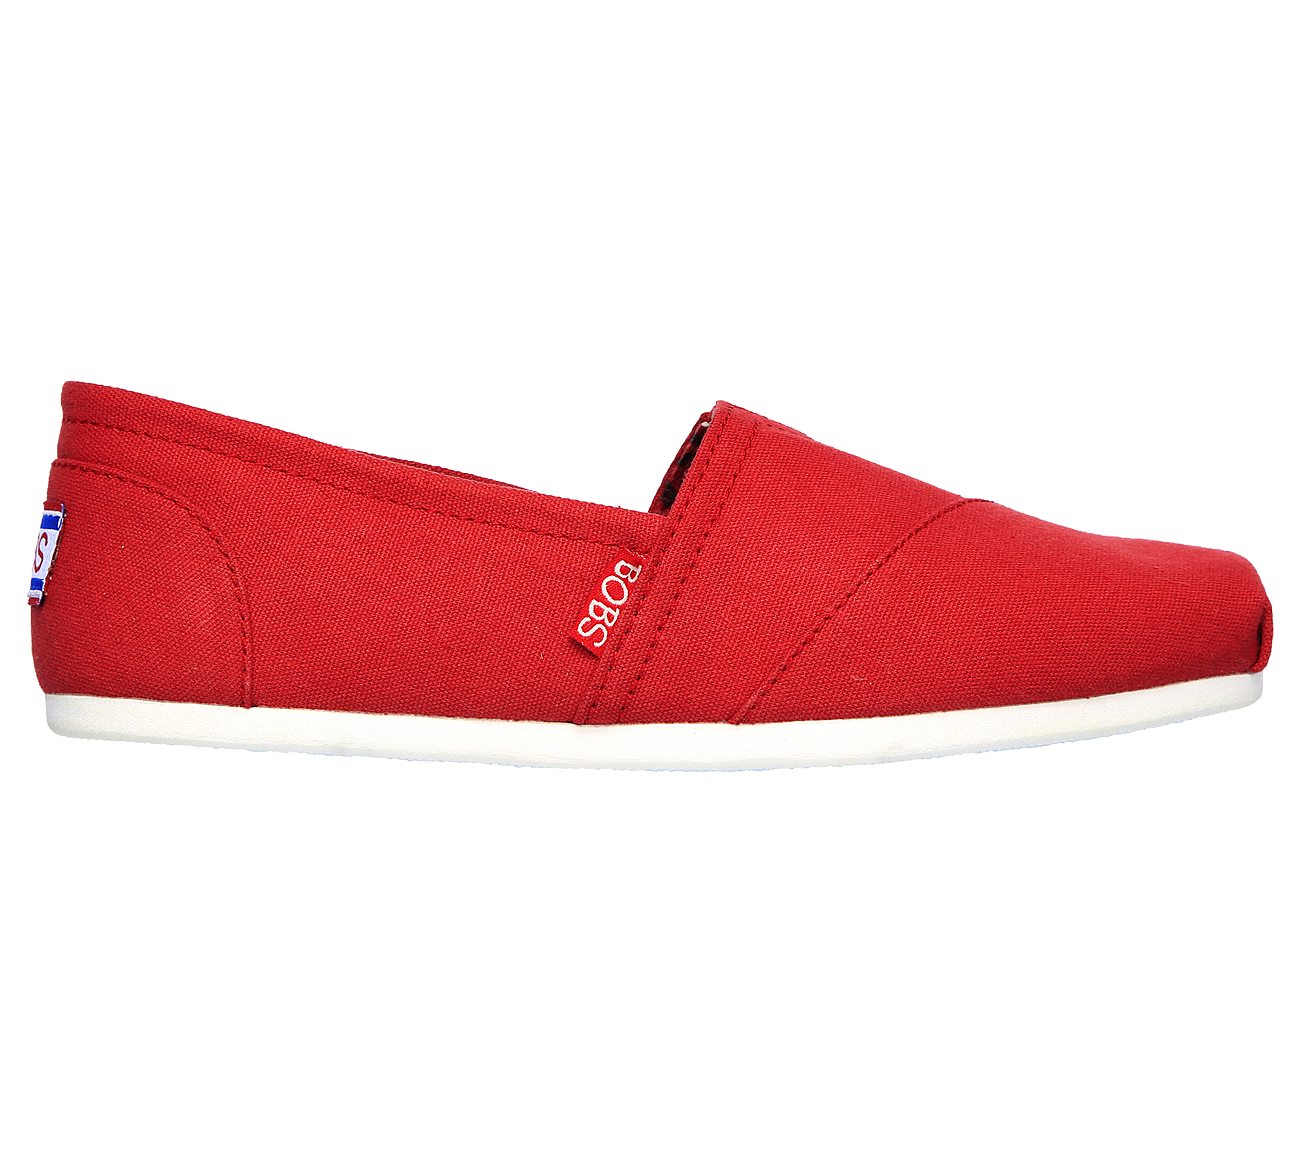 BOBS PLUSH - PEACE & LOVE, DDARK RED Footwear Lateral View